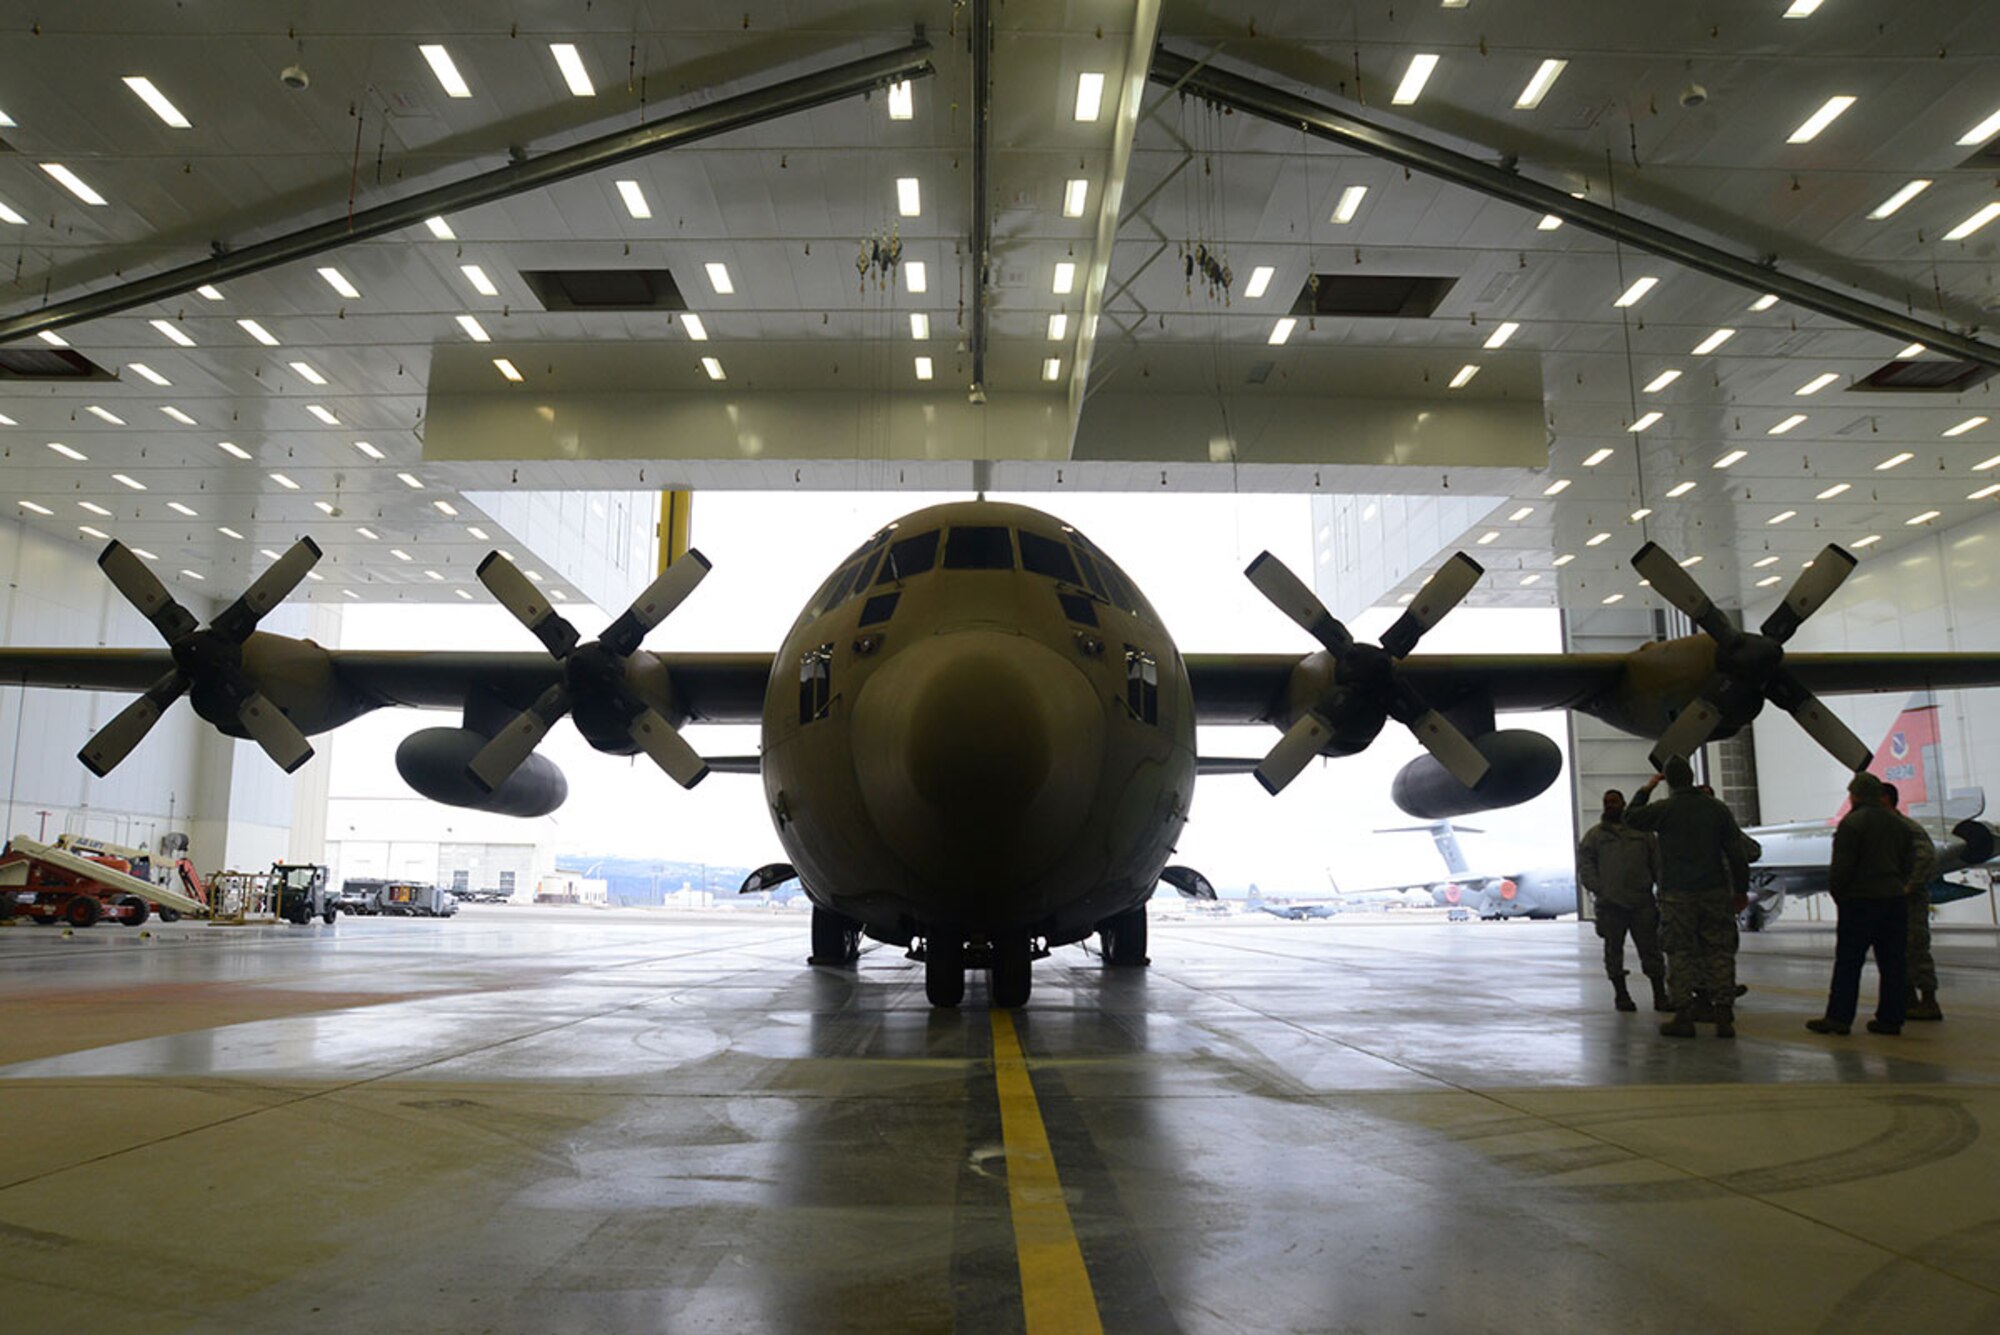 The static C-130 Hercules sits in Hangar 21 at Joint Base Elmendorf-Richardson Feb. 27, 2016. The aircraft is scheduled to be sanded, painted grey and returned to Heritage Park in April. (U.S. Air Force photo by Airman 1st Class Christopher R. Morales)